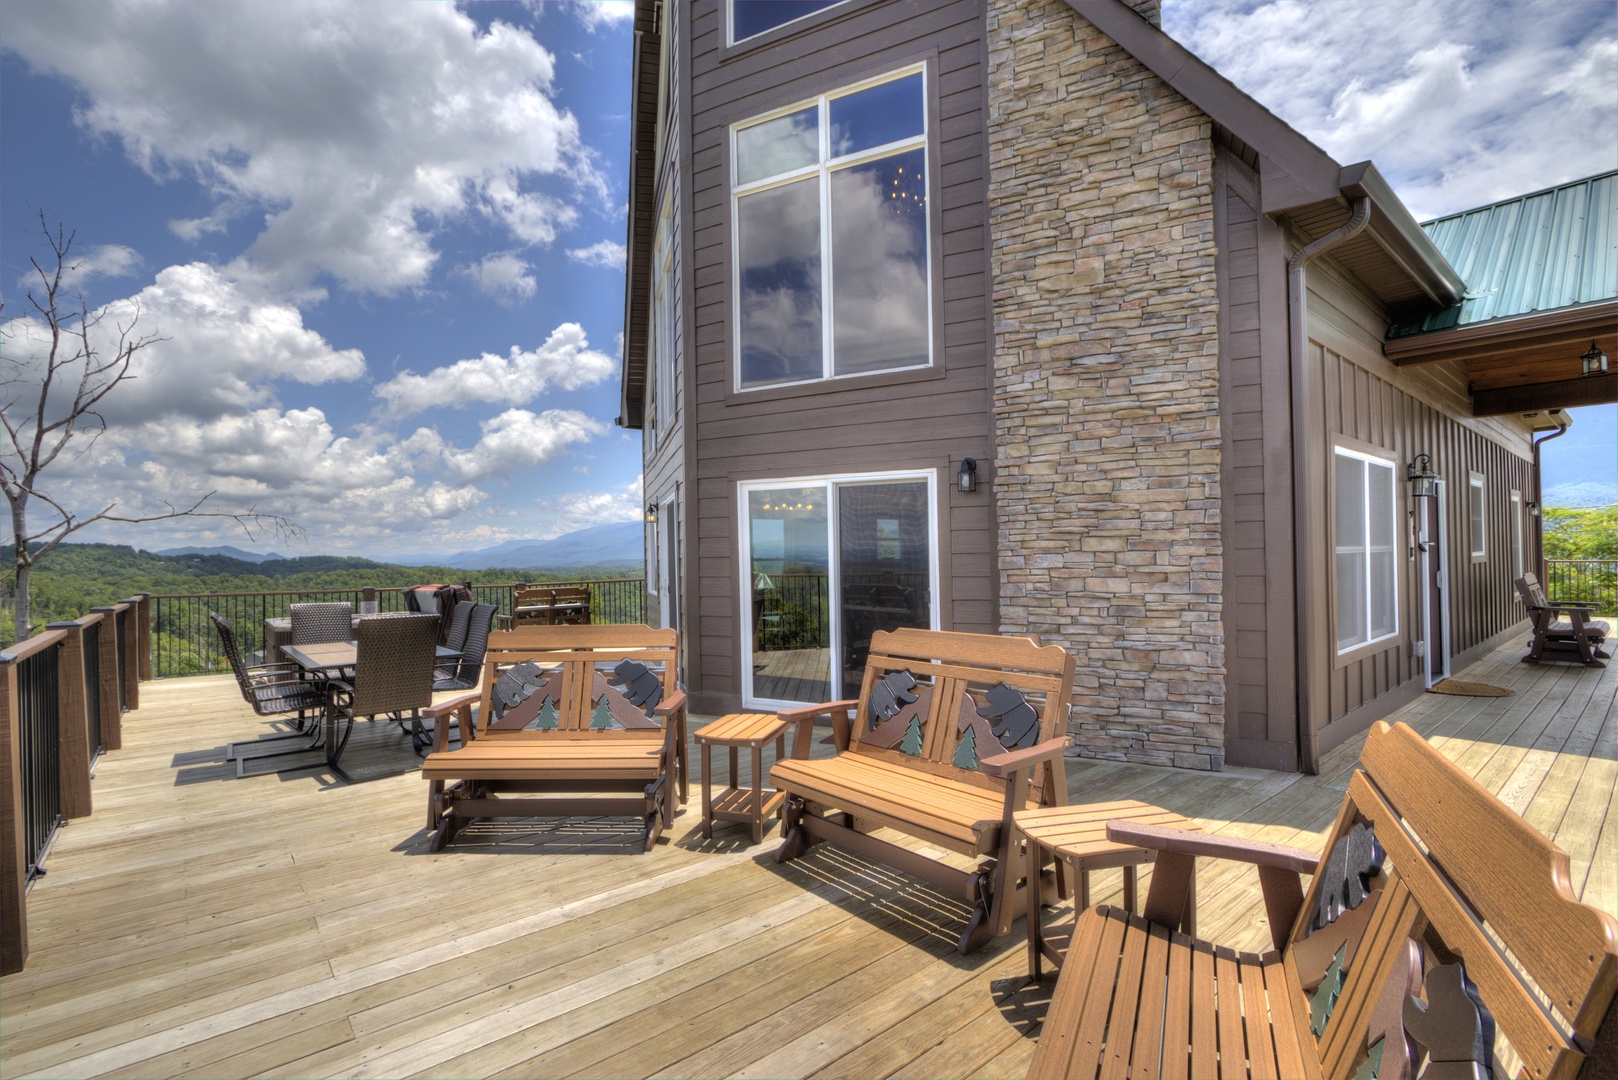 Deck Seating at The Best View Lodge, a 5 bedroom cabin rental located in gatlinburg